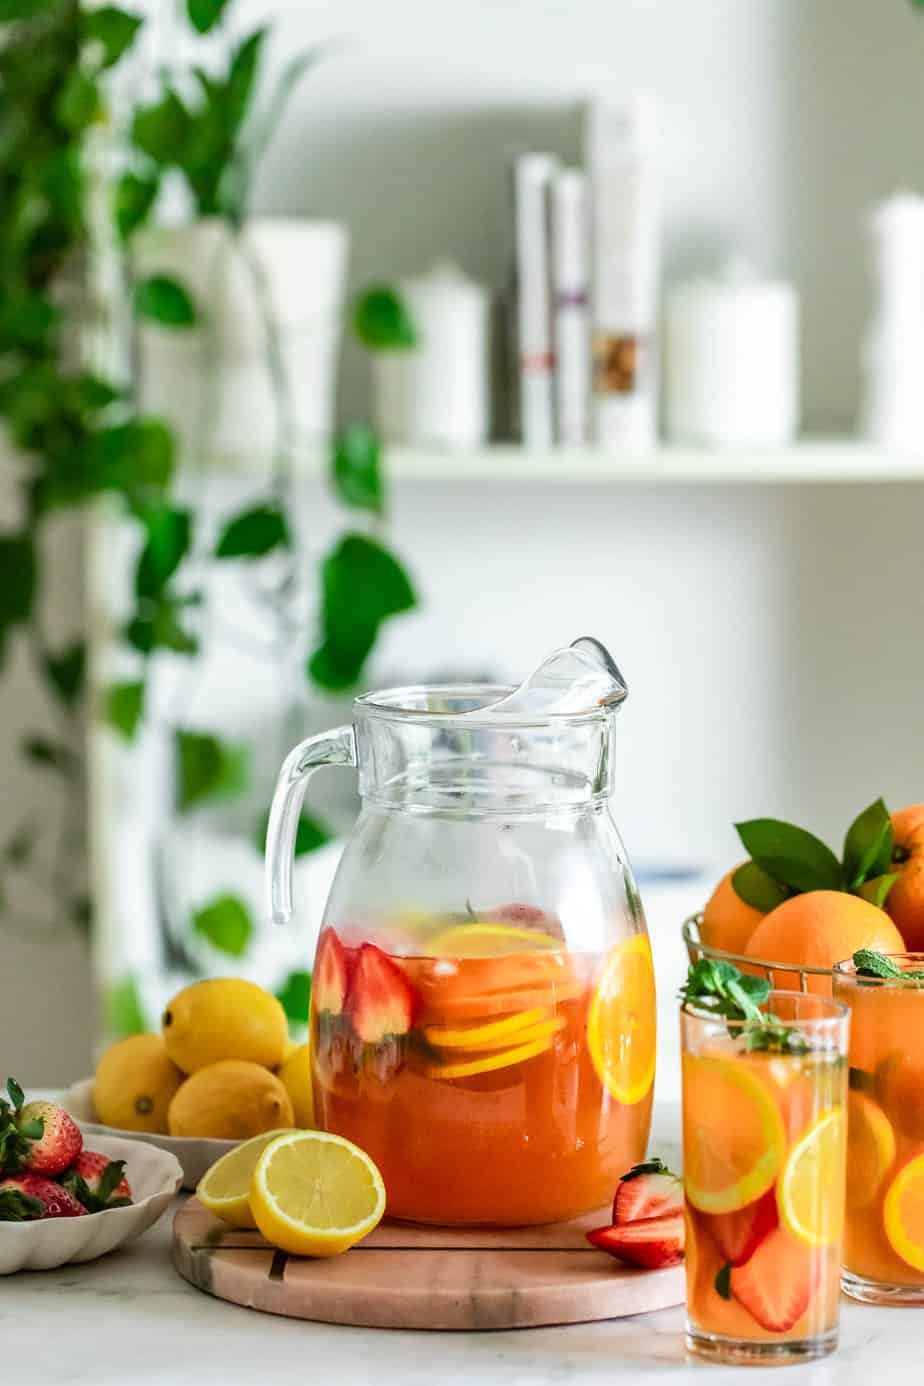 A jug and glasses full of peach green tea surrounded by fresh fruit.